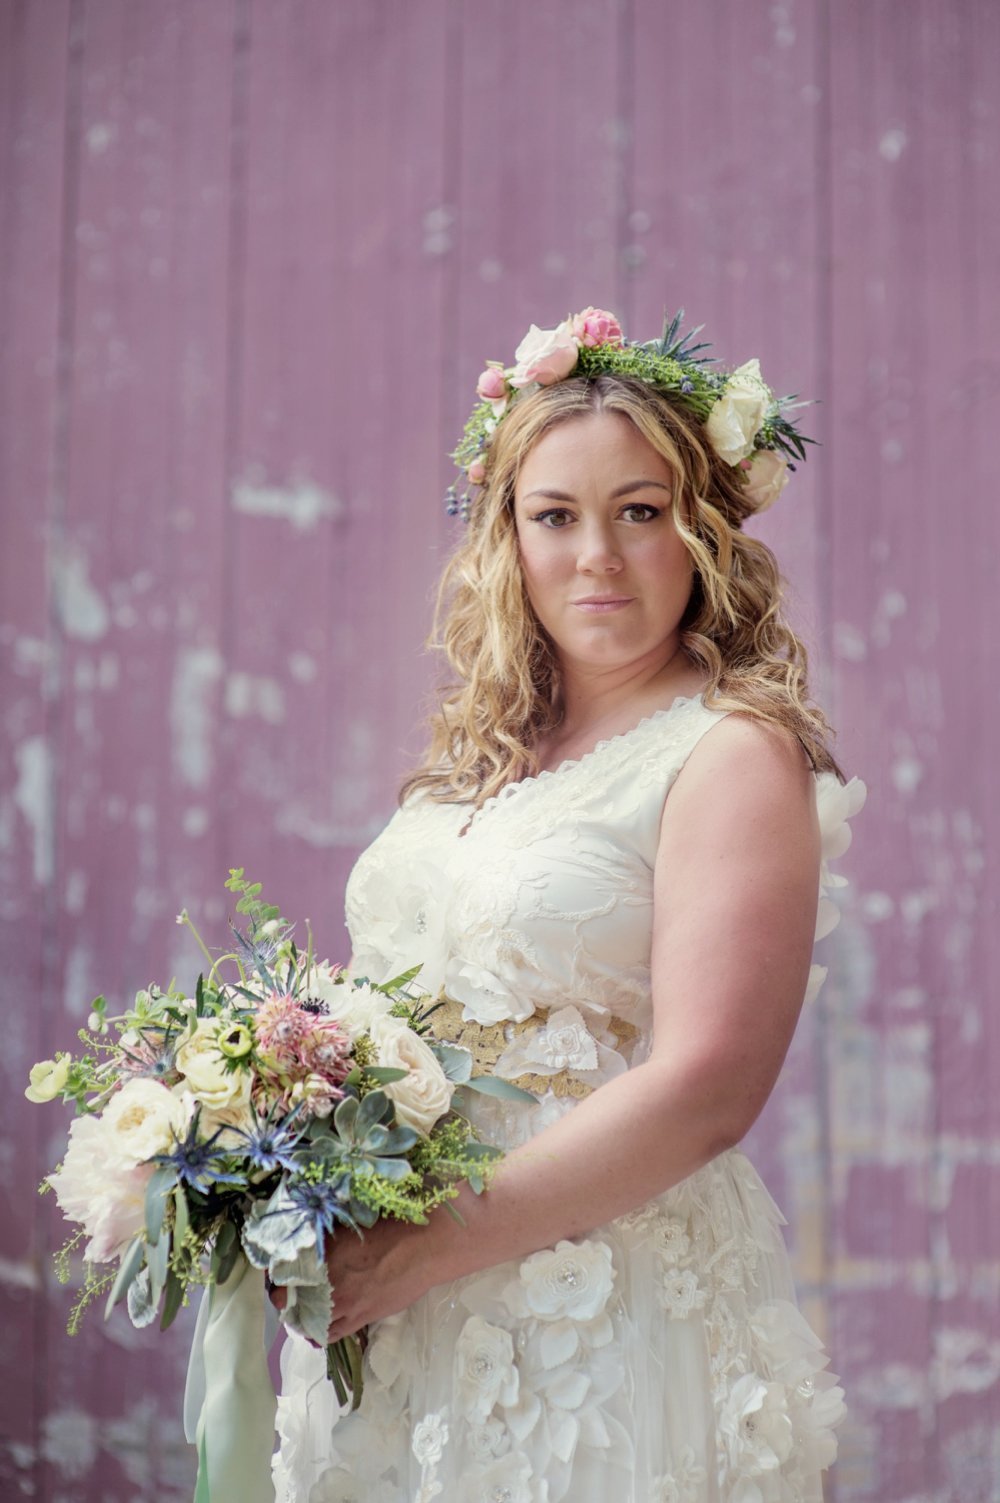 Gorgeous bride with floral crown in a Claire Pettibone gown with rustic bouquet